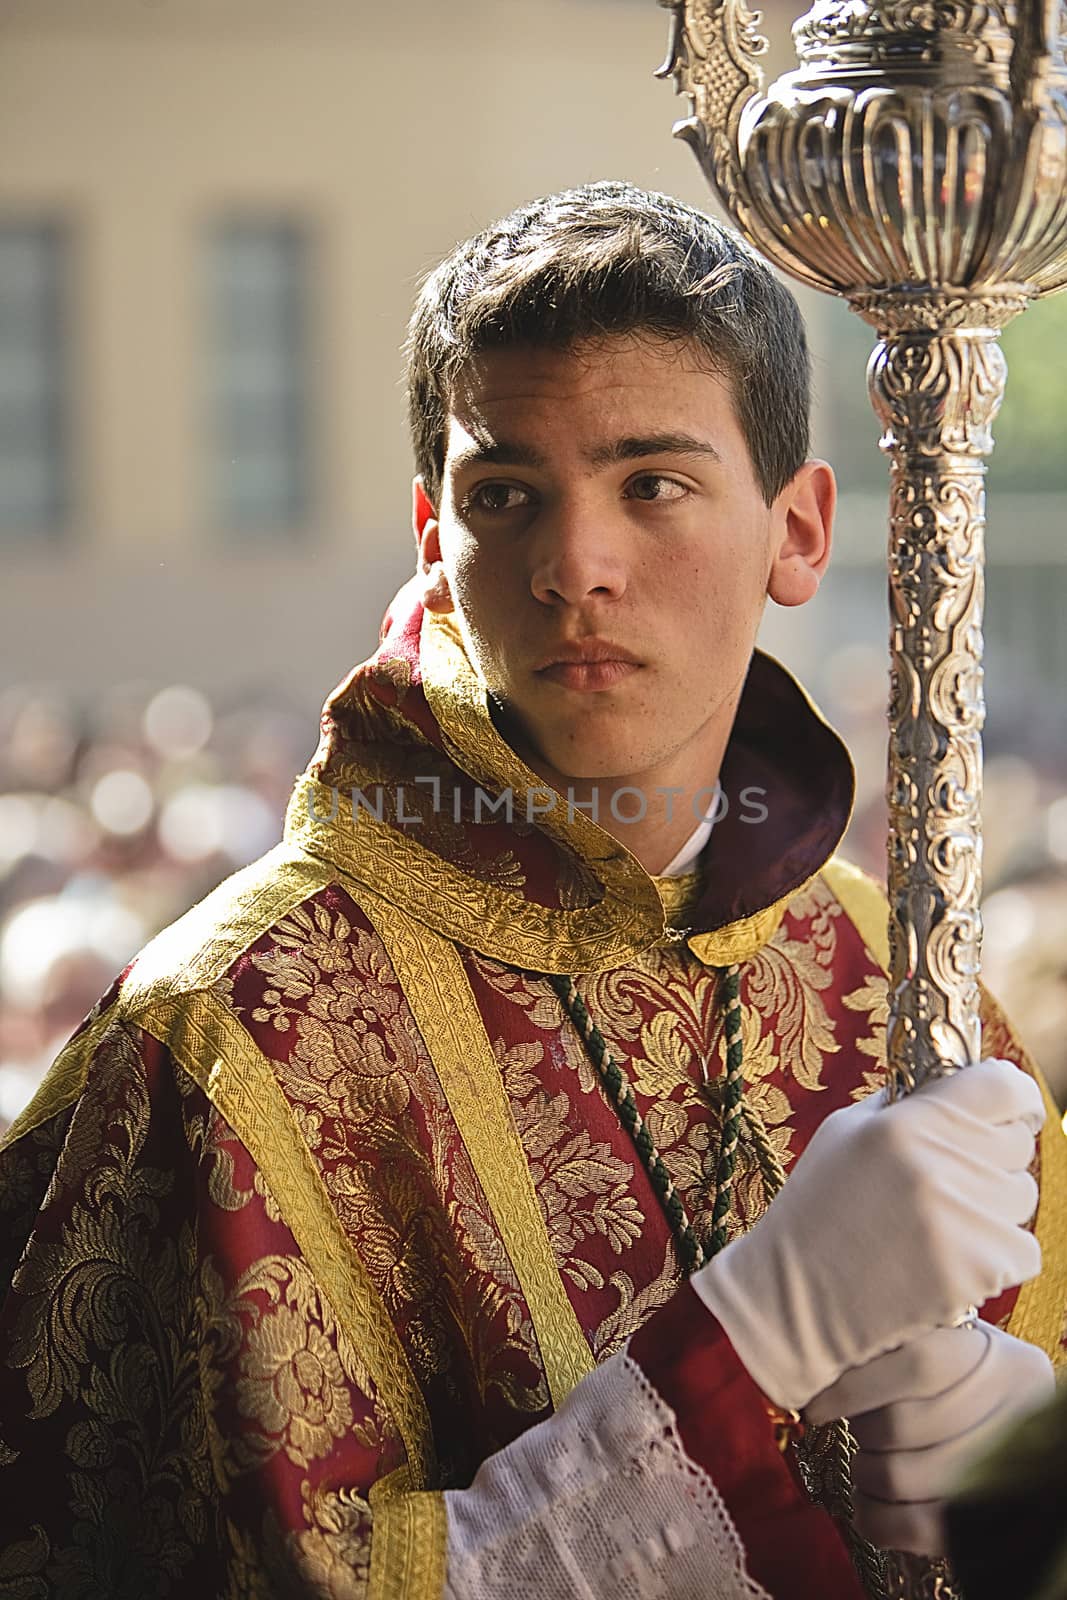 Boy dressed in dalmatic in procession of holy week, Spain